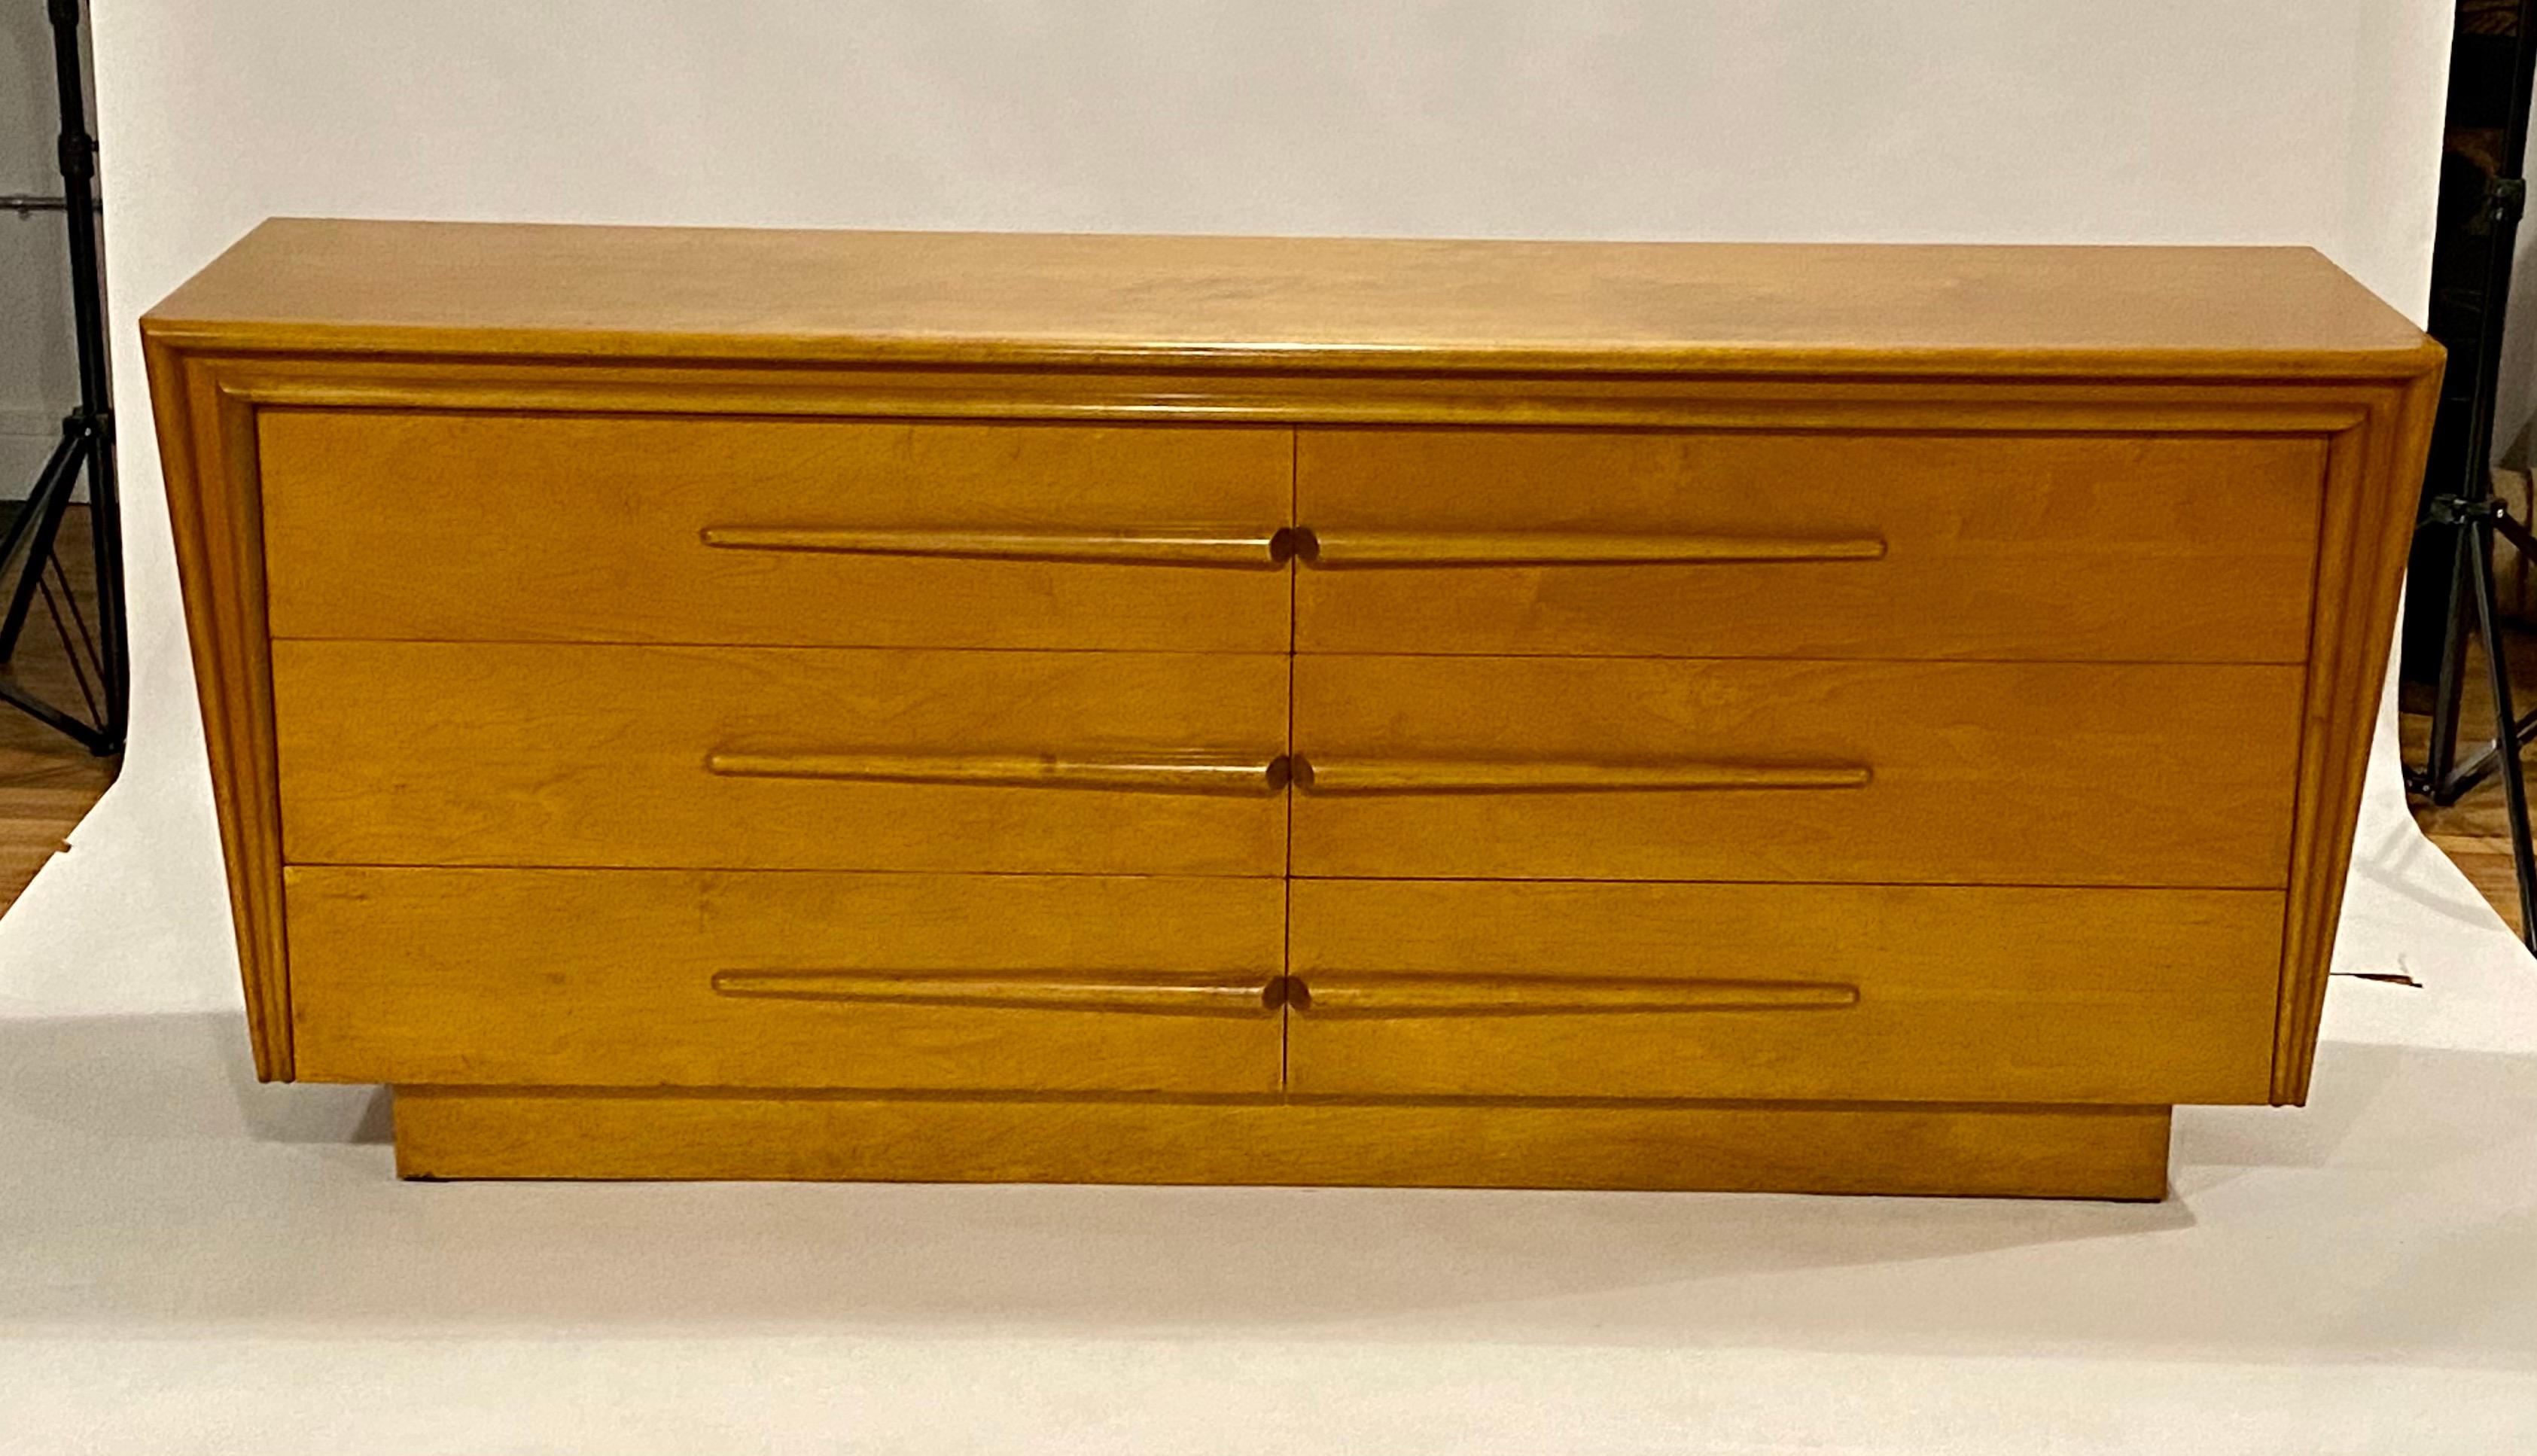 Mid-century maple wood dresser by Edmond Spence executed in a remarkable machine age/Art Deco streamline design with 6-pullout / pull-out drawers and two removable accessory trays. This dresser is amazingly clean for its age inside and out, 1950s